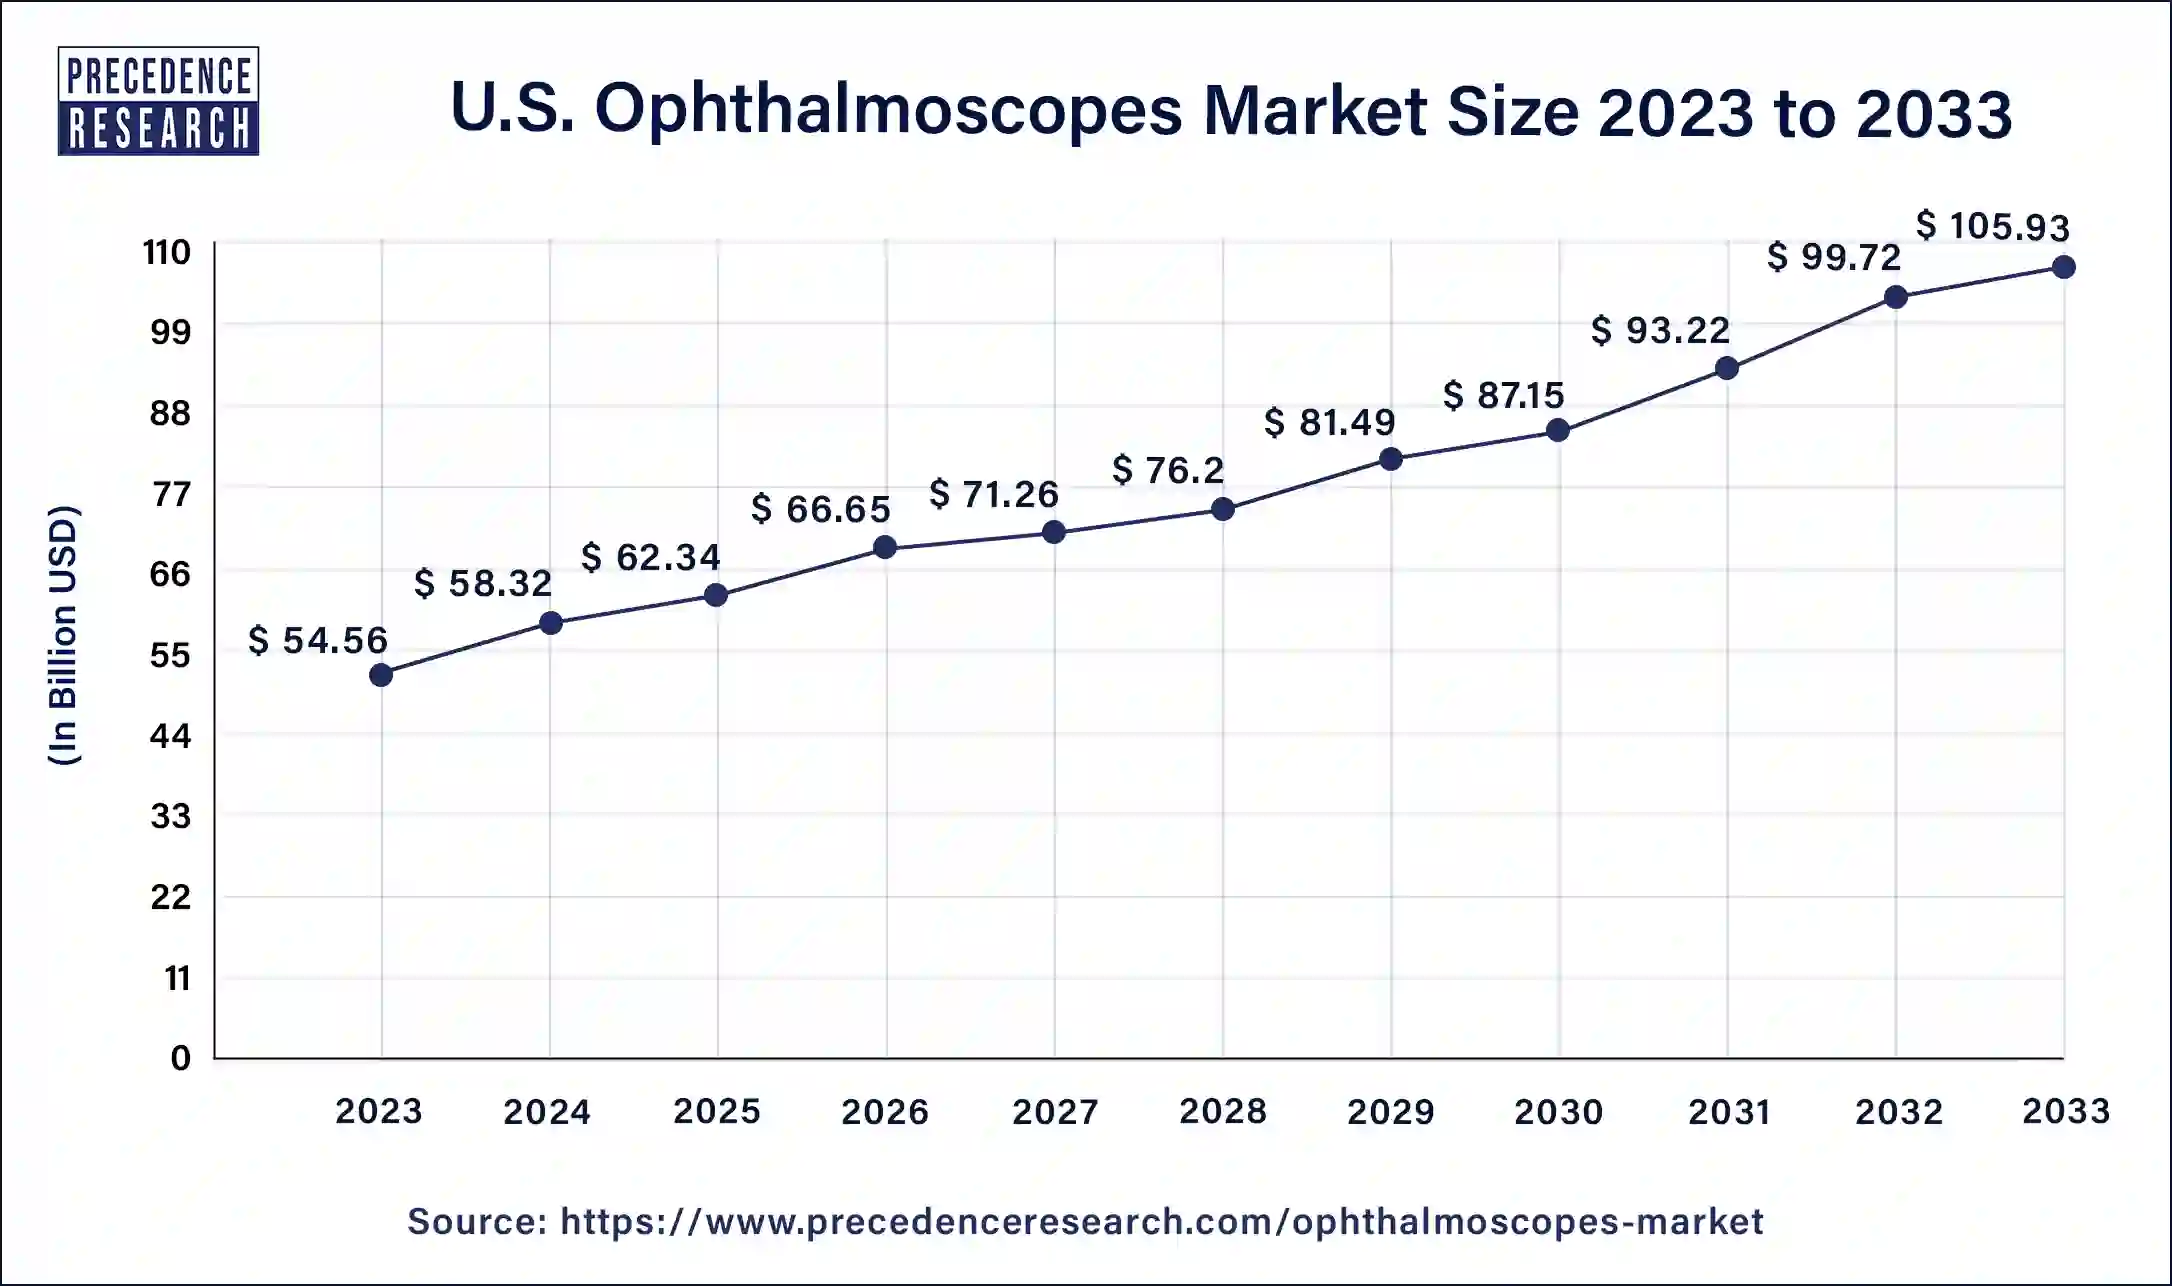 U.S. Ophthalmoscopes Market Size 2024 to 2033